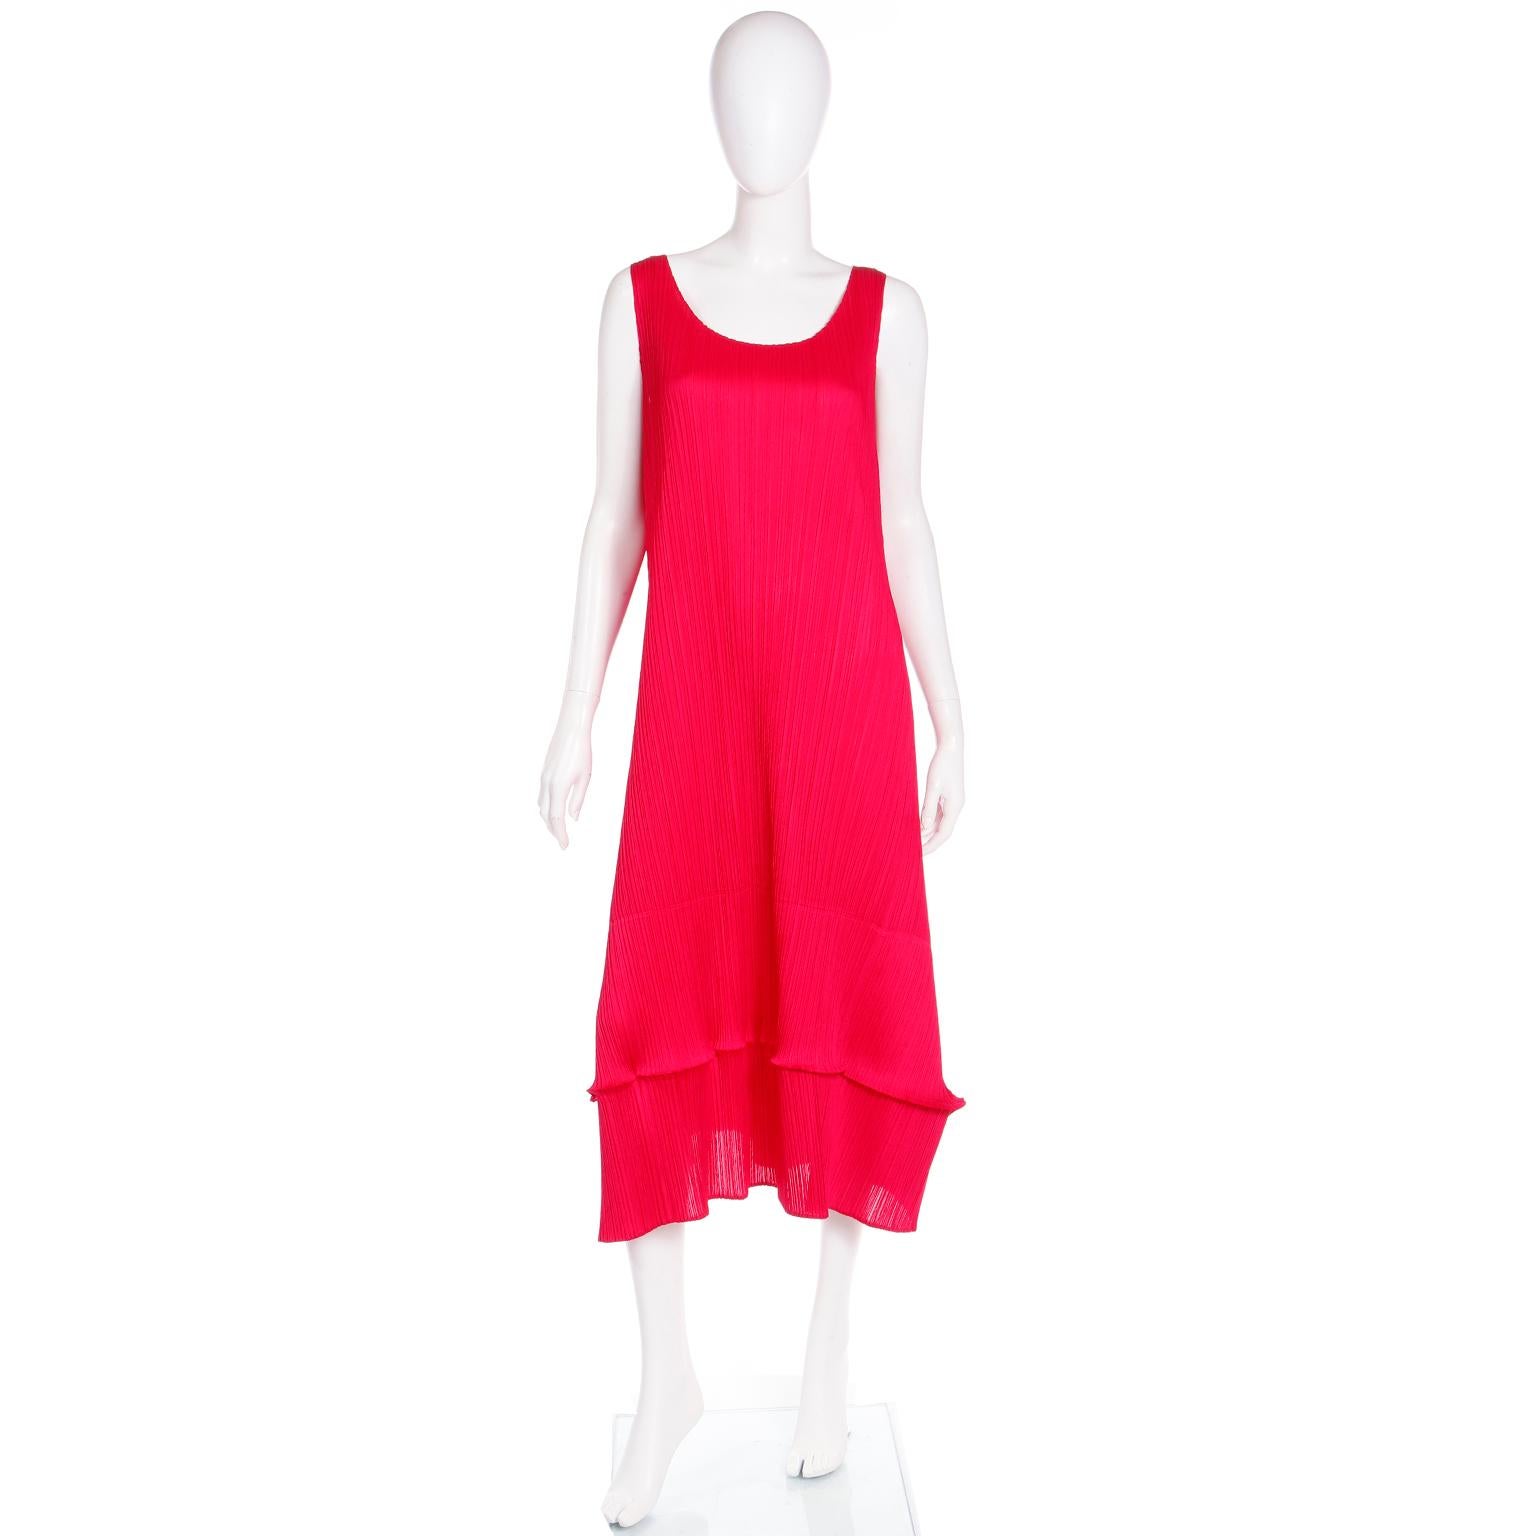 This bold raspberry red Issey Miyake Pleats Please Dress has hundreds of horizontal plisse pleats (8 per inch) that span the length of the dress. The top of the dress is a sleeveless tank and it extends just above the ankle length with an A-line